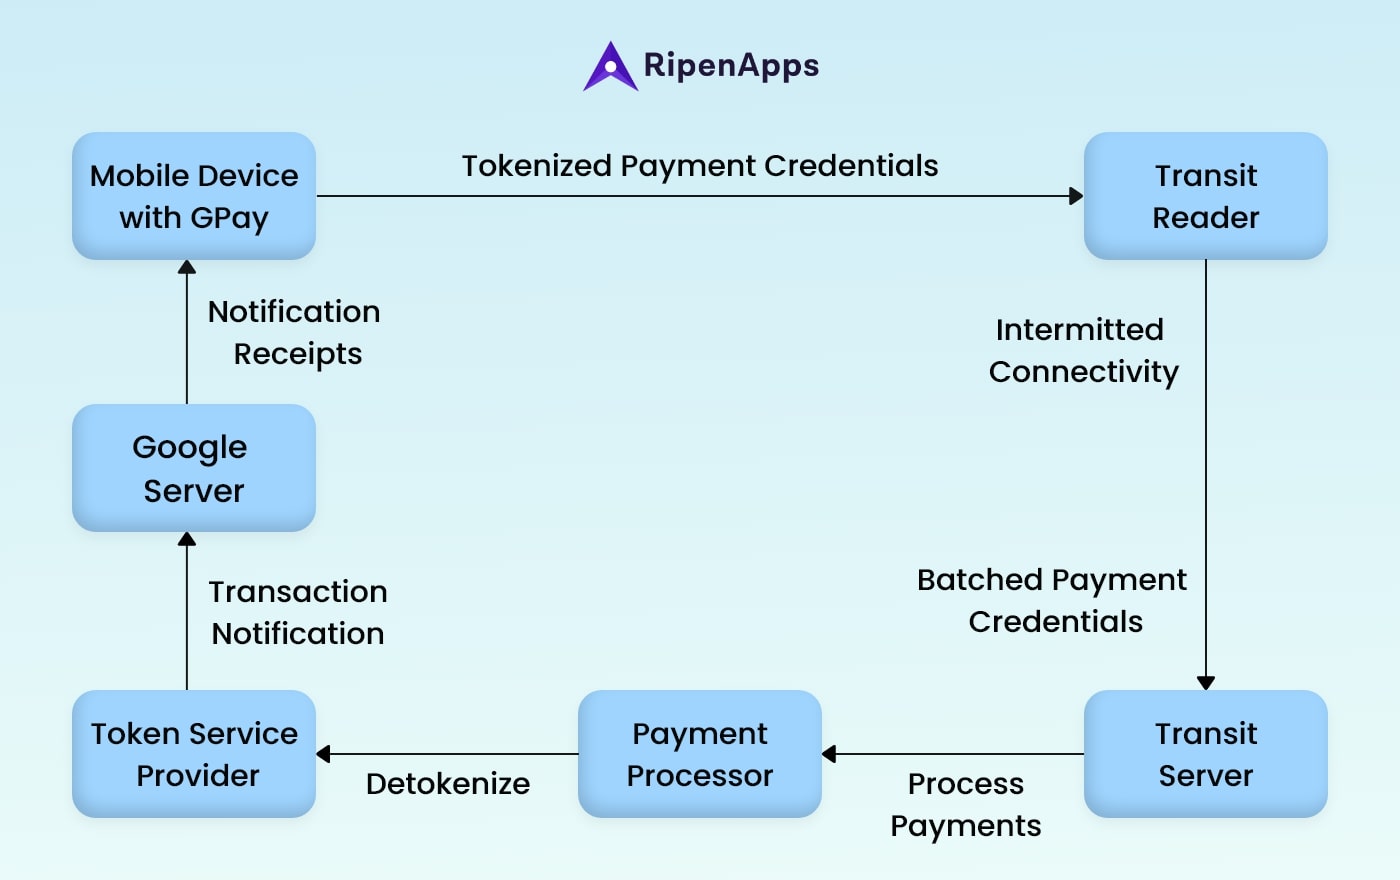 tokenized payment credentials